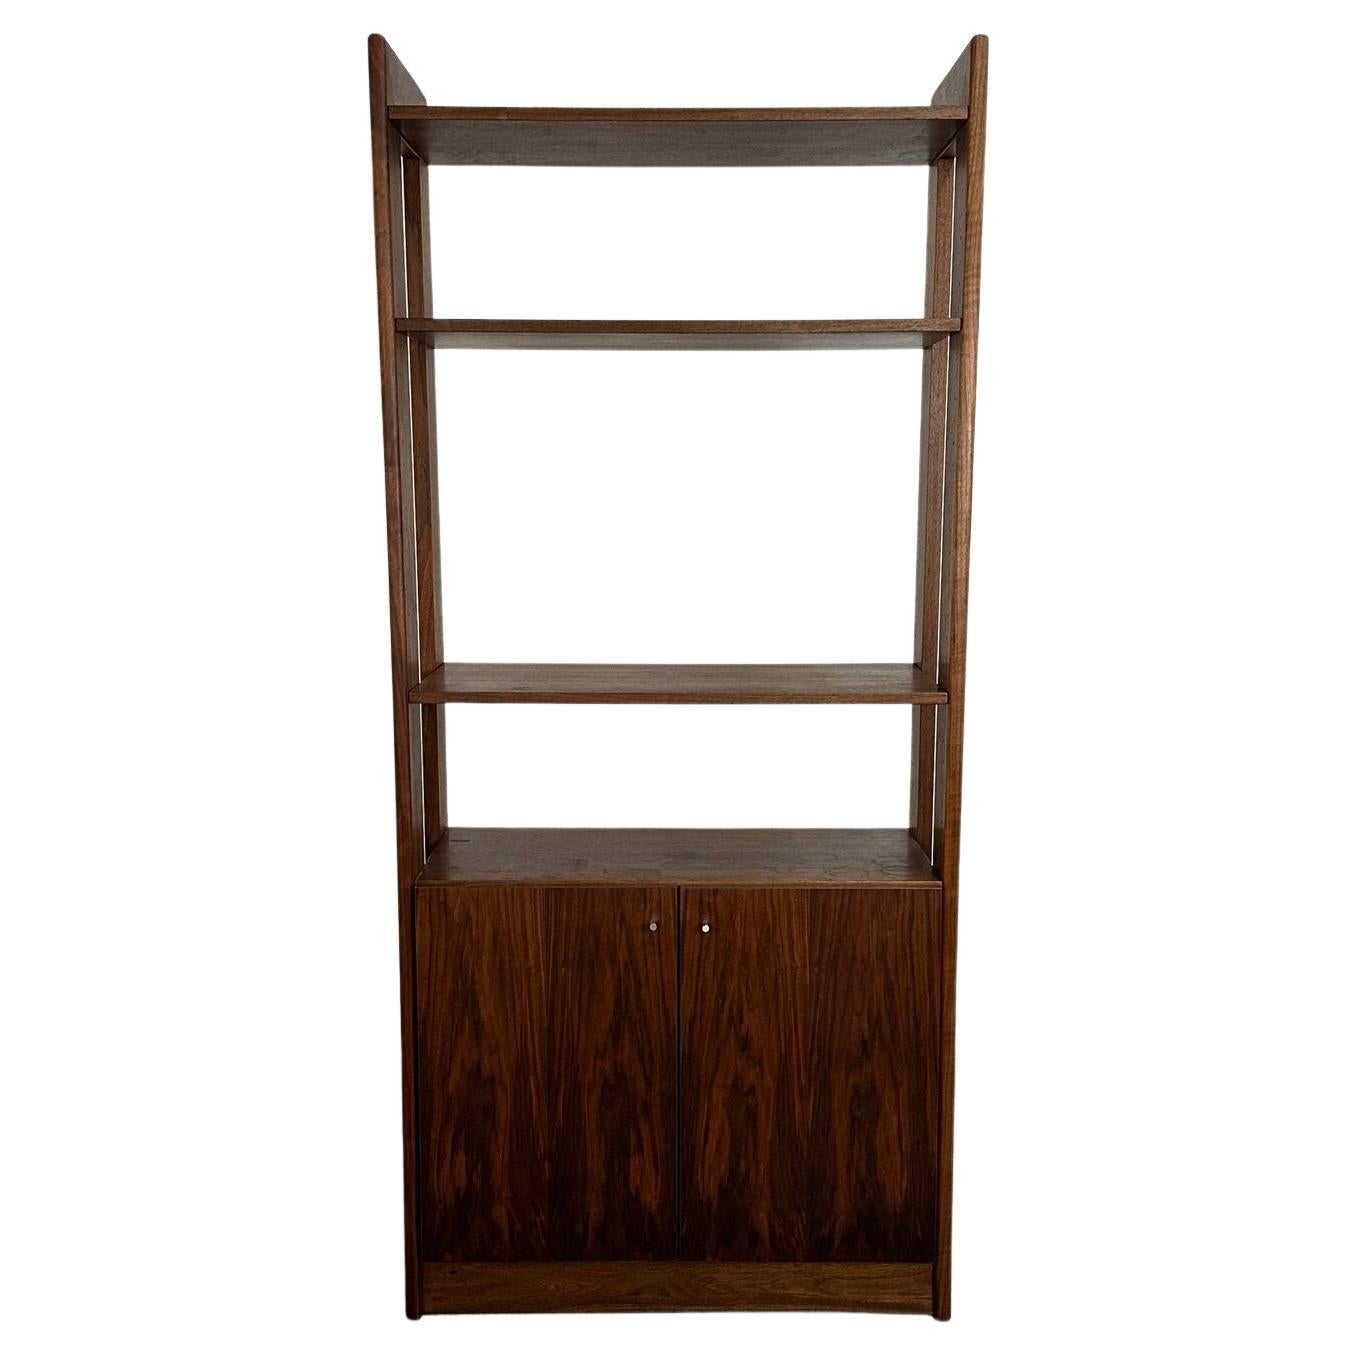 Barzilay style free standing bookcase #2 For Sale